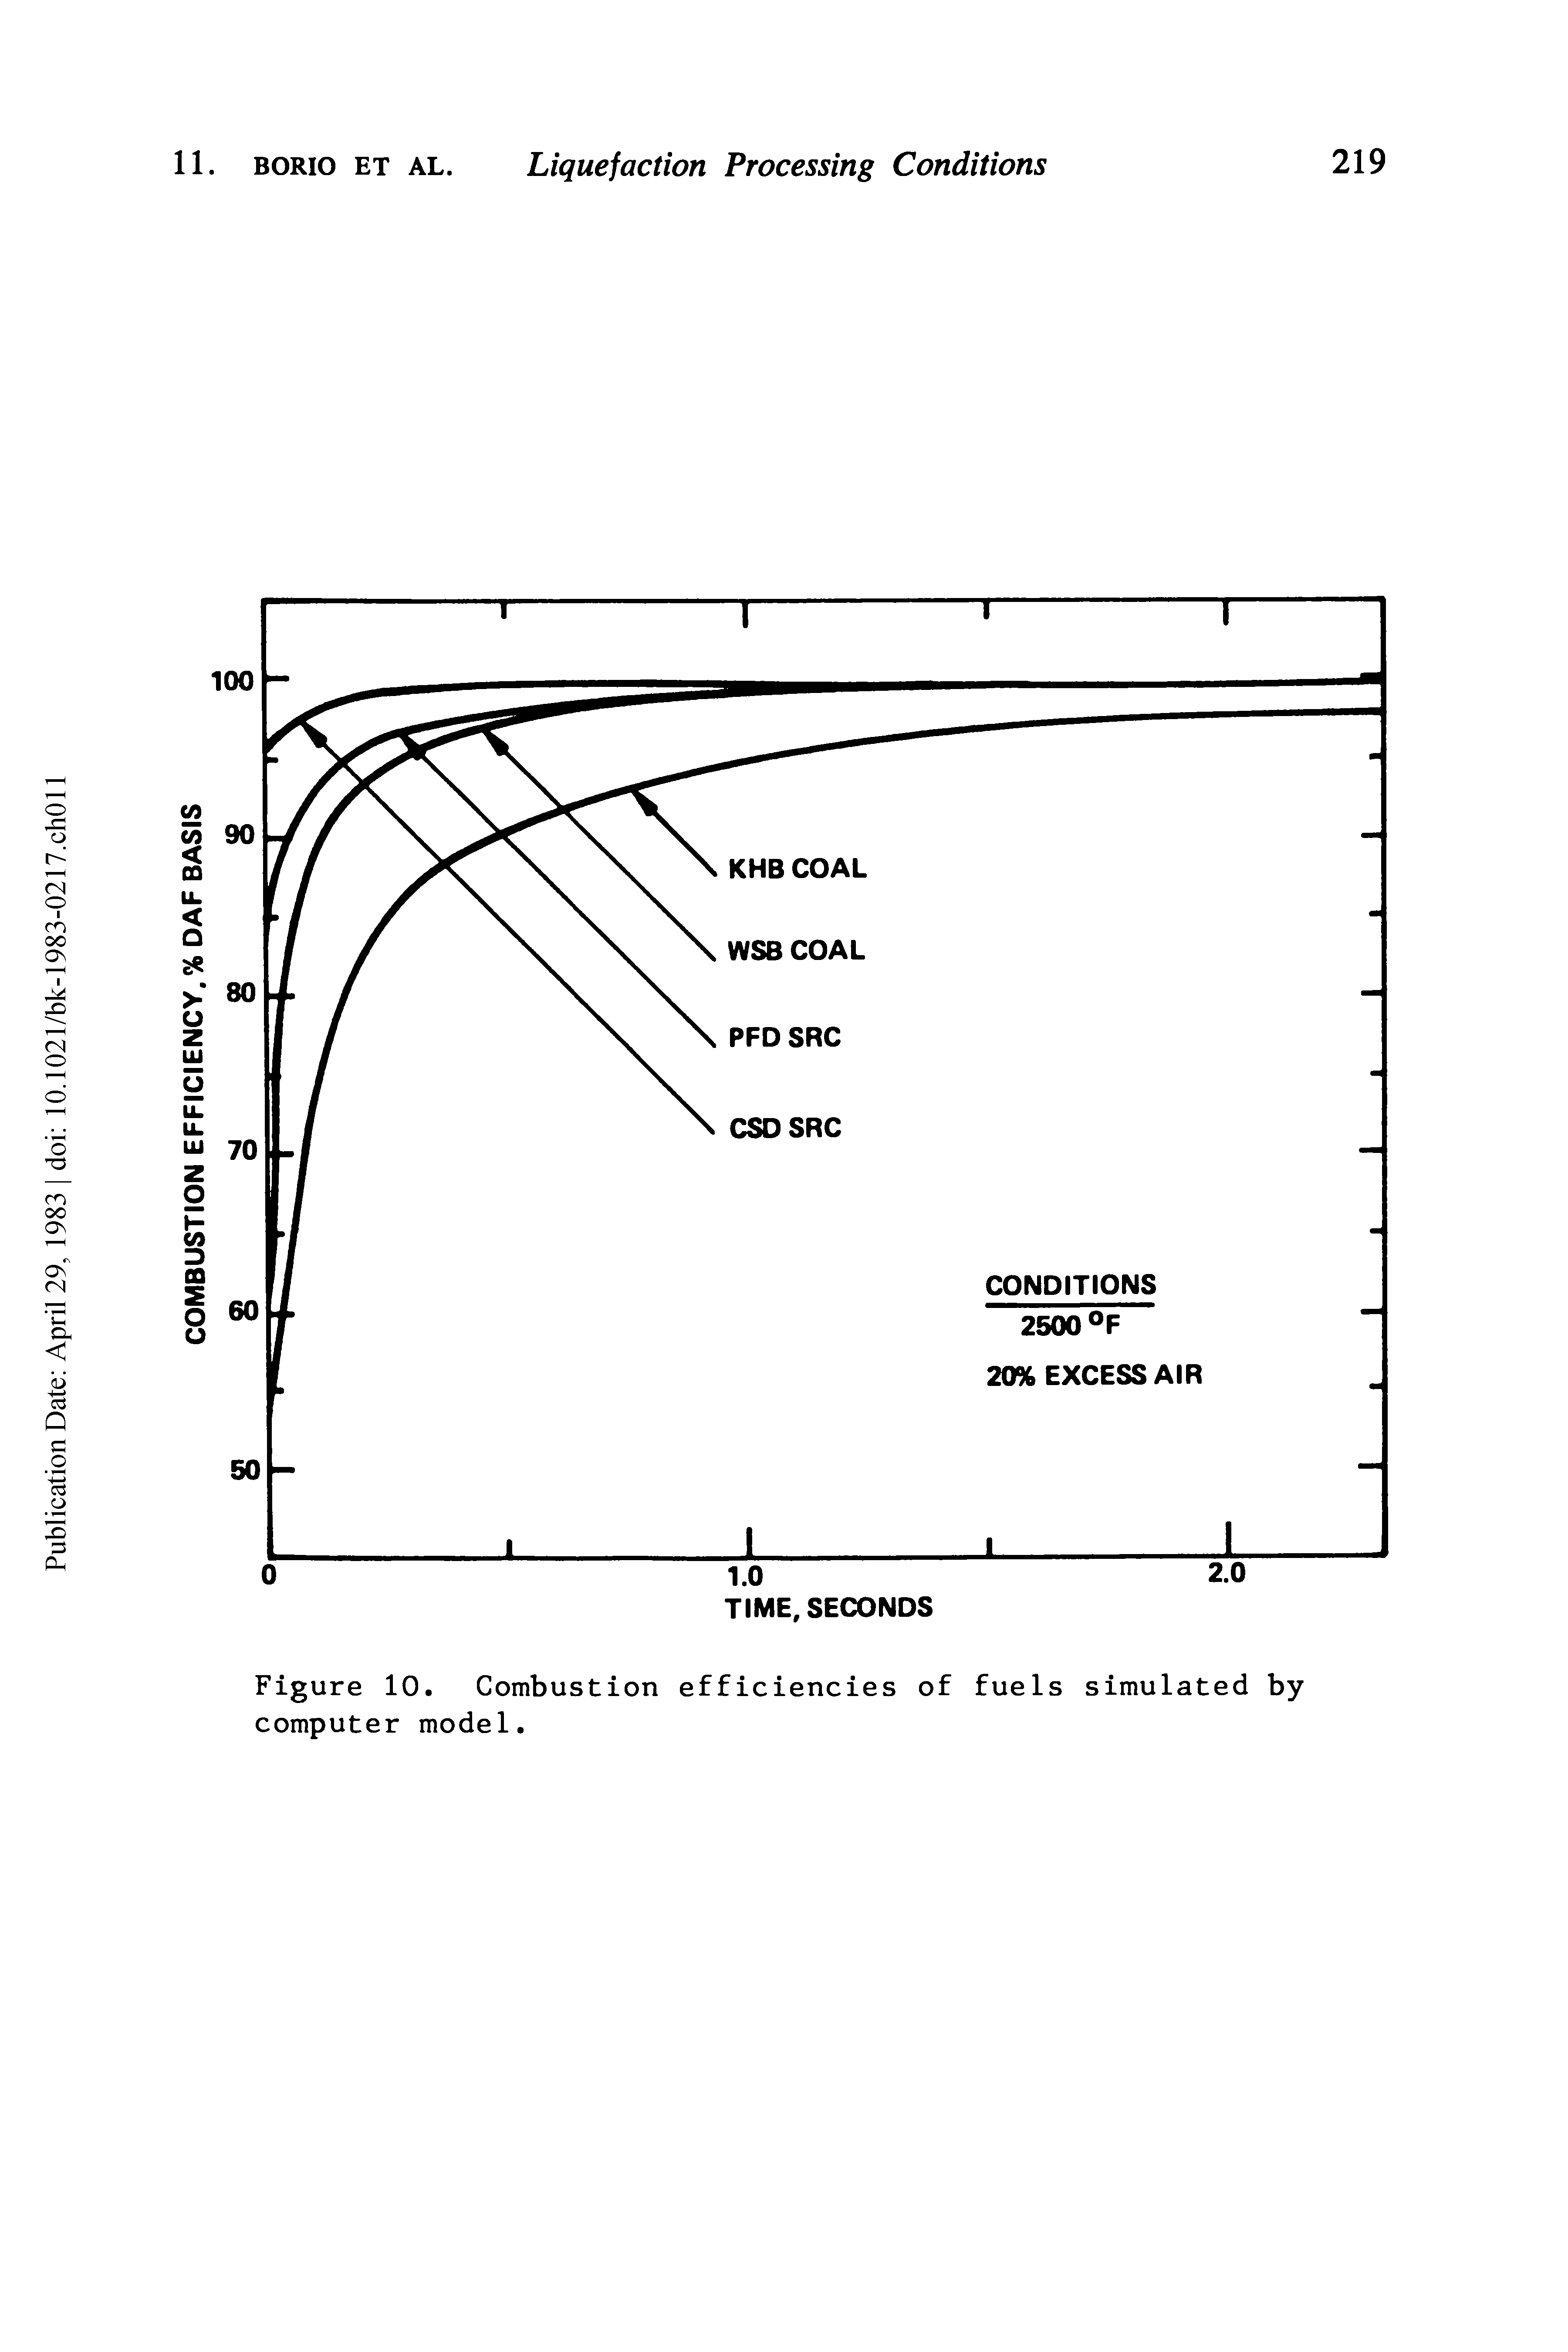 Figure 10. Combustion efficiencies of fuels simulated by computer model.